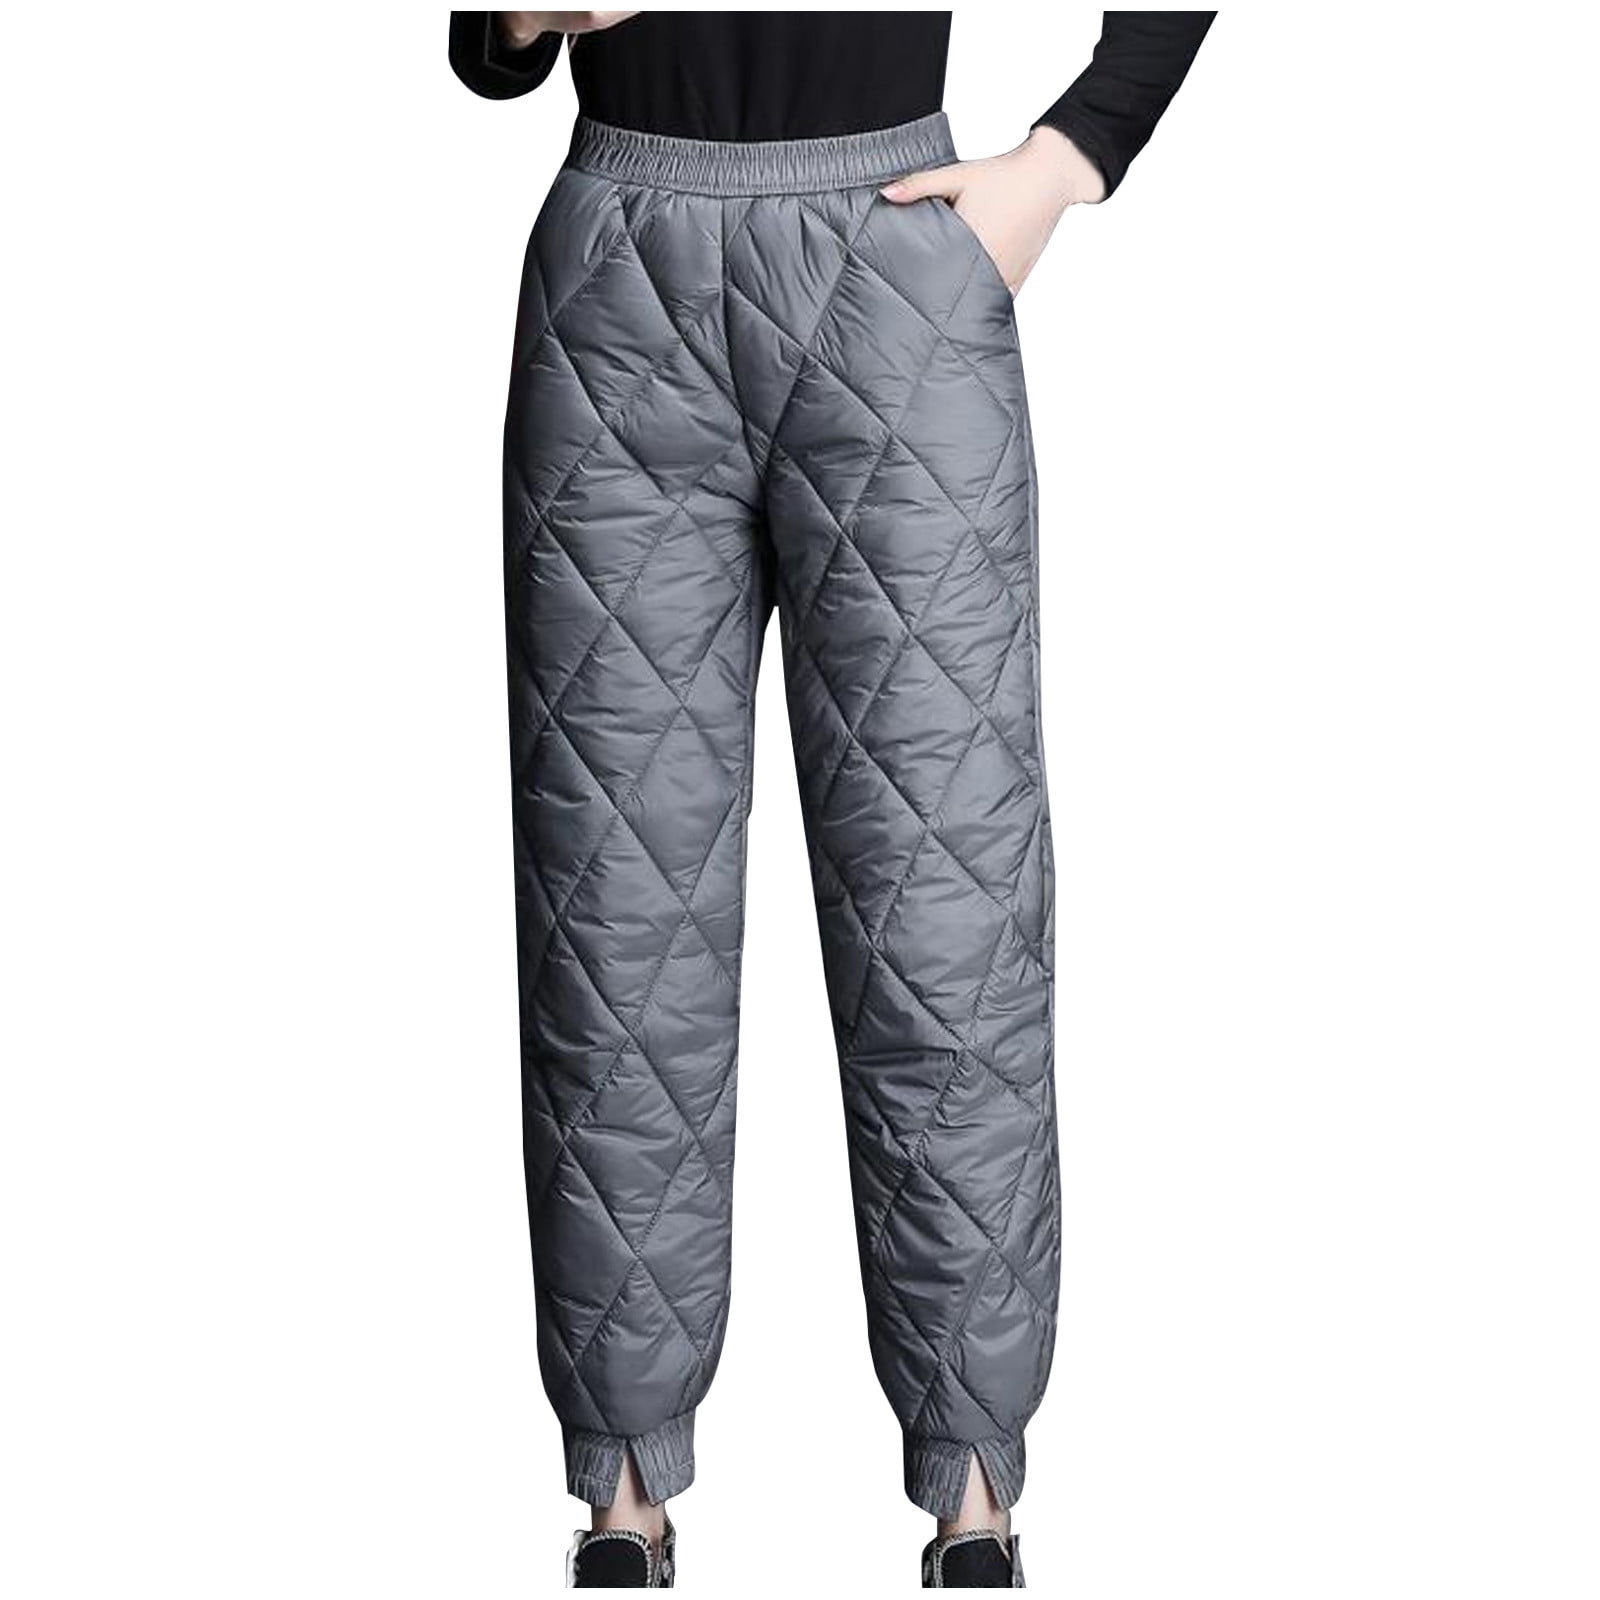 Airpow Clearance Jogger Pants Women's Summer Fashion Ice Silk